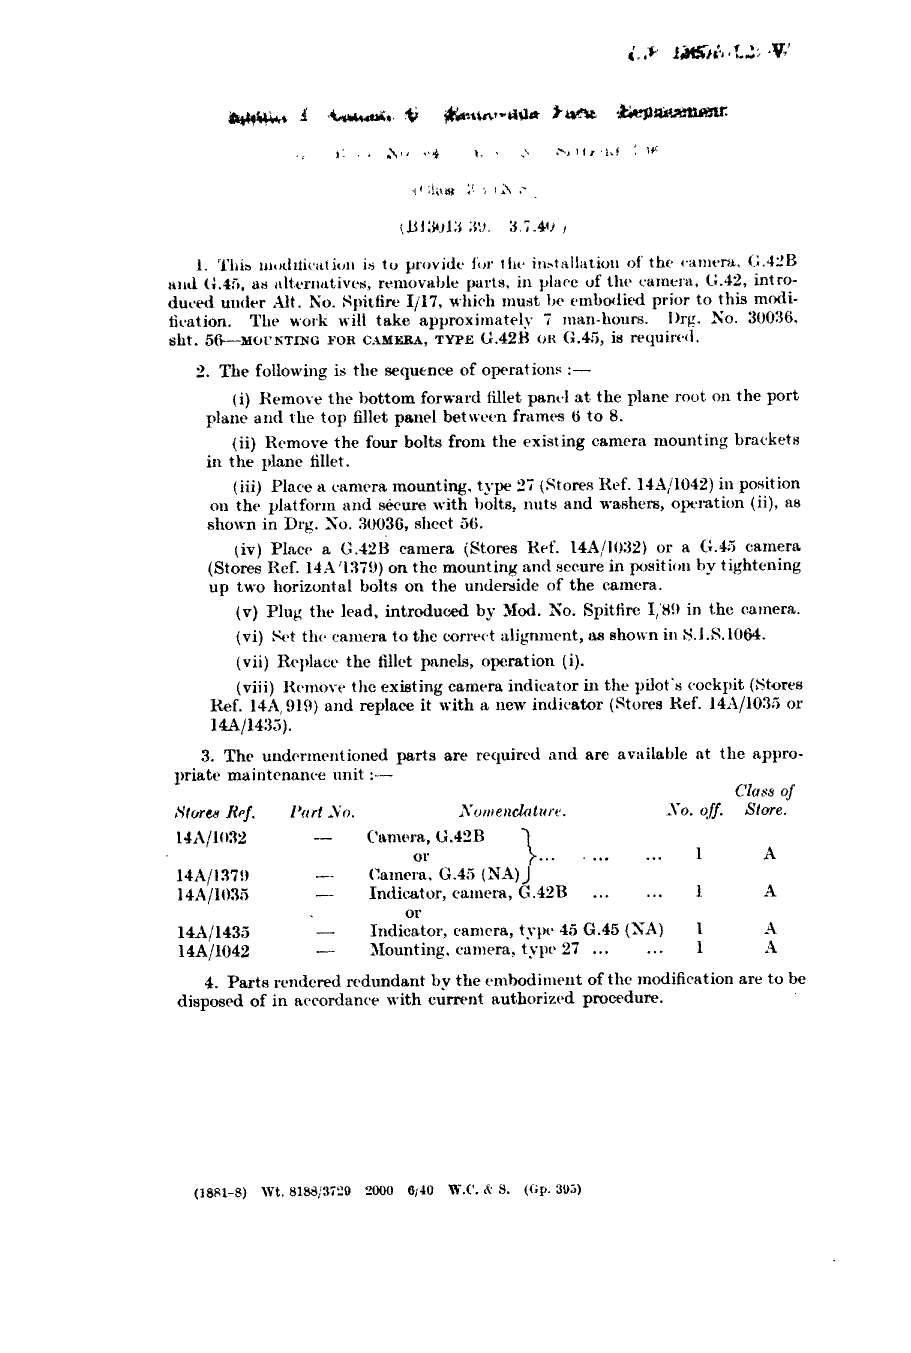 Sample page 1 from AirCorps Library document: Spitfire I G.42 Camera Replacement